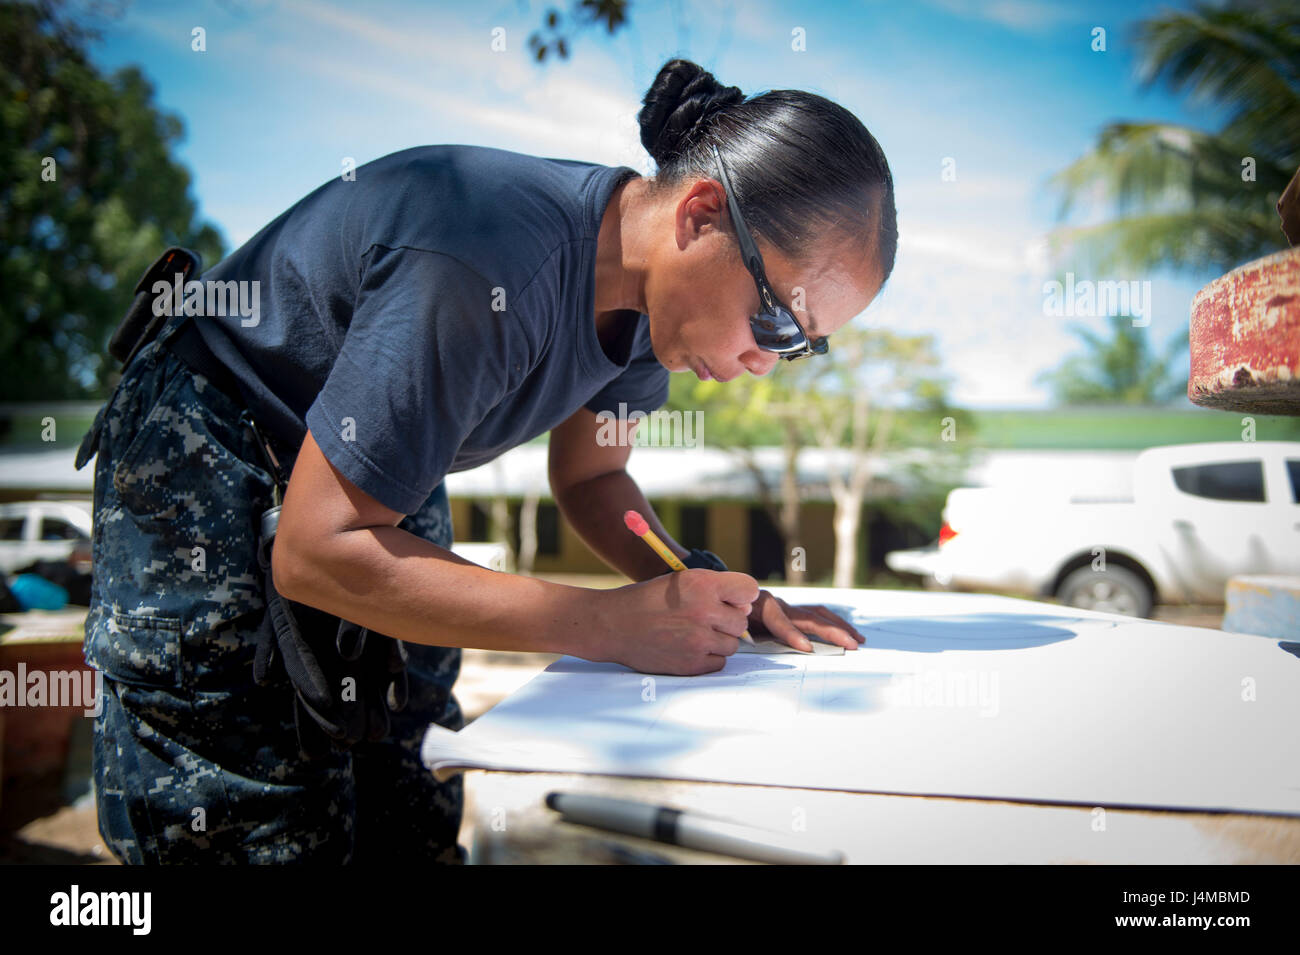 170220-N-YL073-273 TRUJILLO, Honduras (Feb. 20, 2017) – Hospital Corpsman 2nd Class Kristine Perales, a native of Cebu, the Philippines, assigned to the Naval Branch Health Clinic Mayport, Fla., makes a sign to assist patients at the Continuing Promise 2017 (CP-17) medical site in support of CP-17's visit to Trujillo, Honduras. CP-17 is a U.S. Southern Command-sponsored and U.S. Naval Forces Southern Command/U.S. 4th Fleet-conducted deployment to conduct civil-military operations including humanitarian assistance, training engagements, and medical, dental, and veterinary support in an effort t Stock Photo